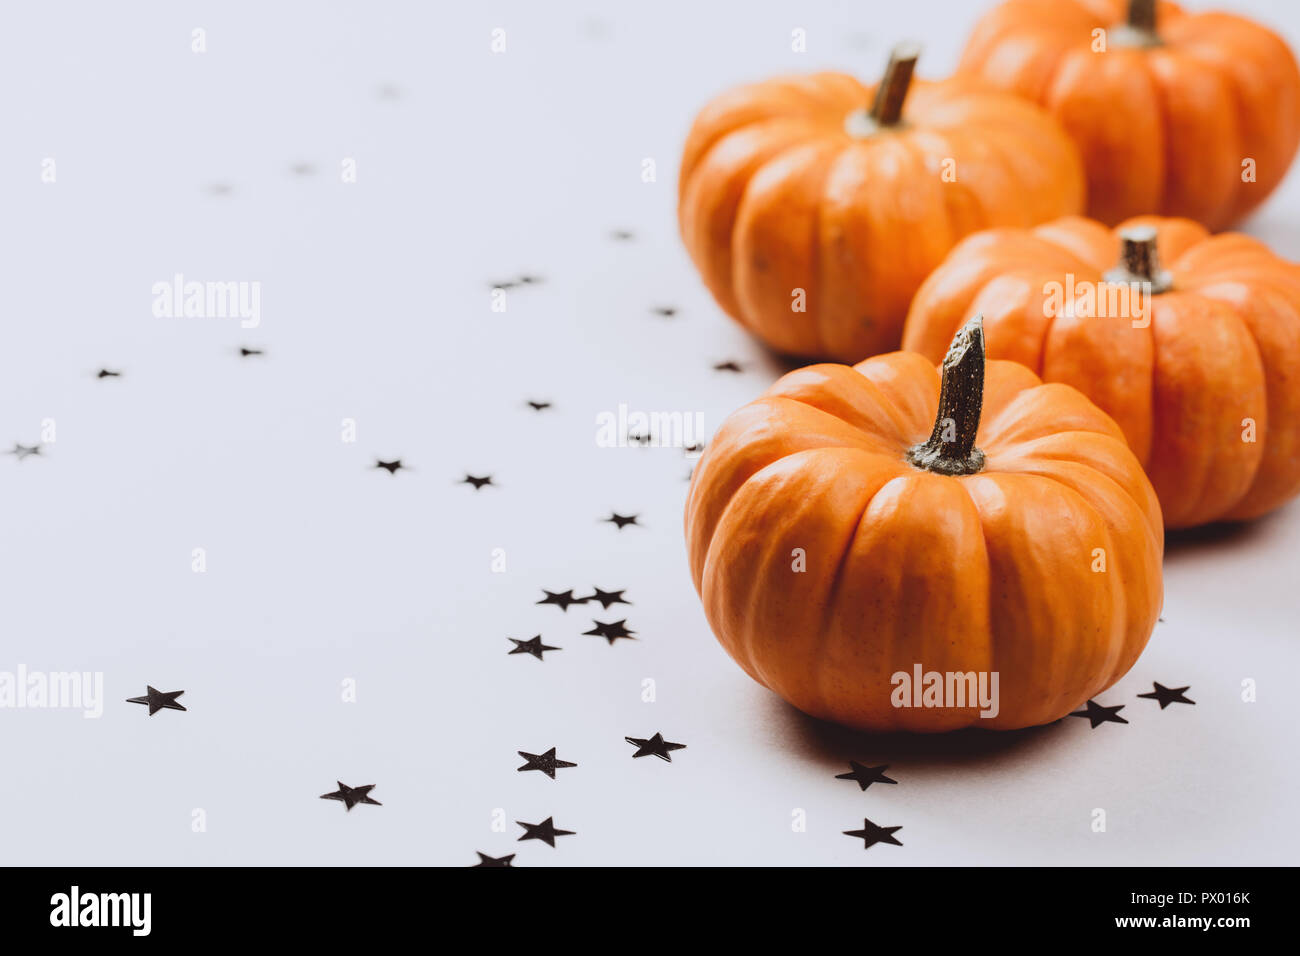 Page 3 - Four Stars High Resolution Stock Photography and Images - Alamy